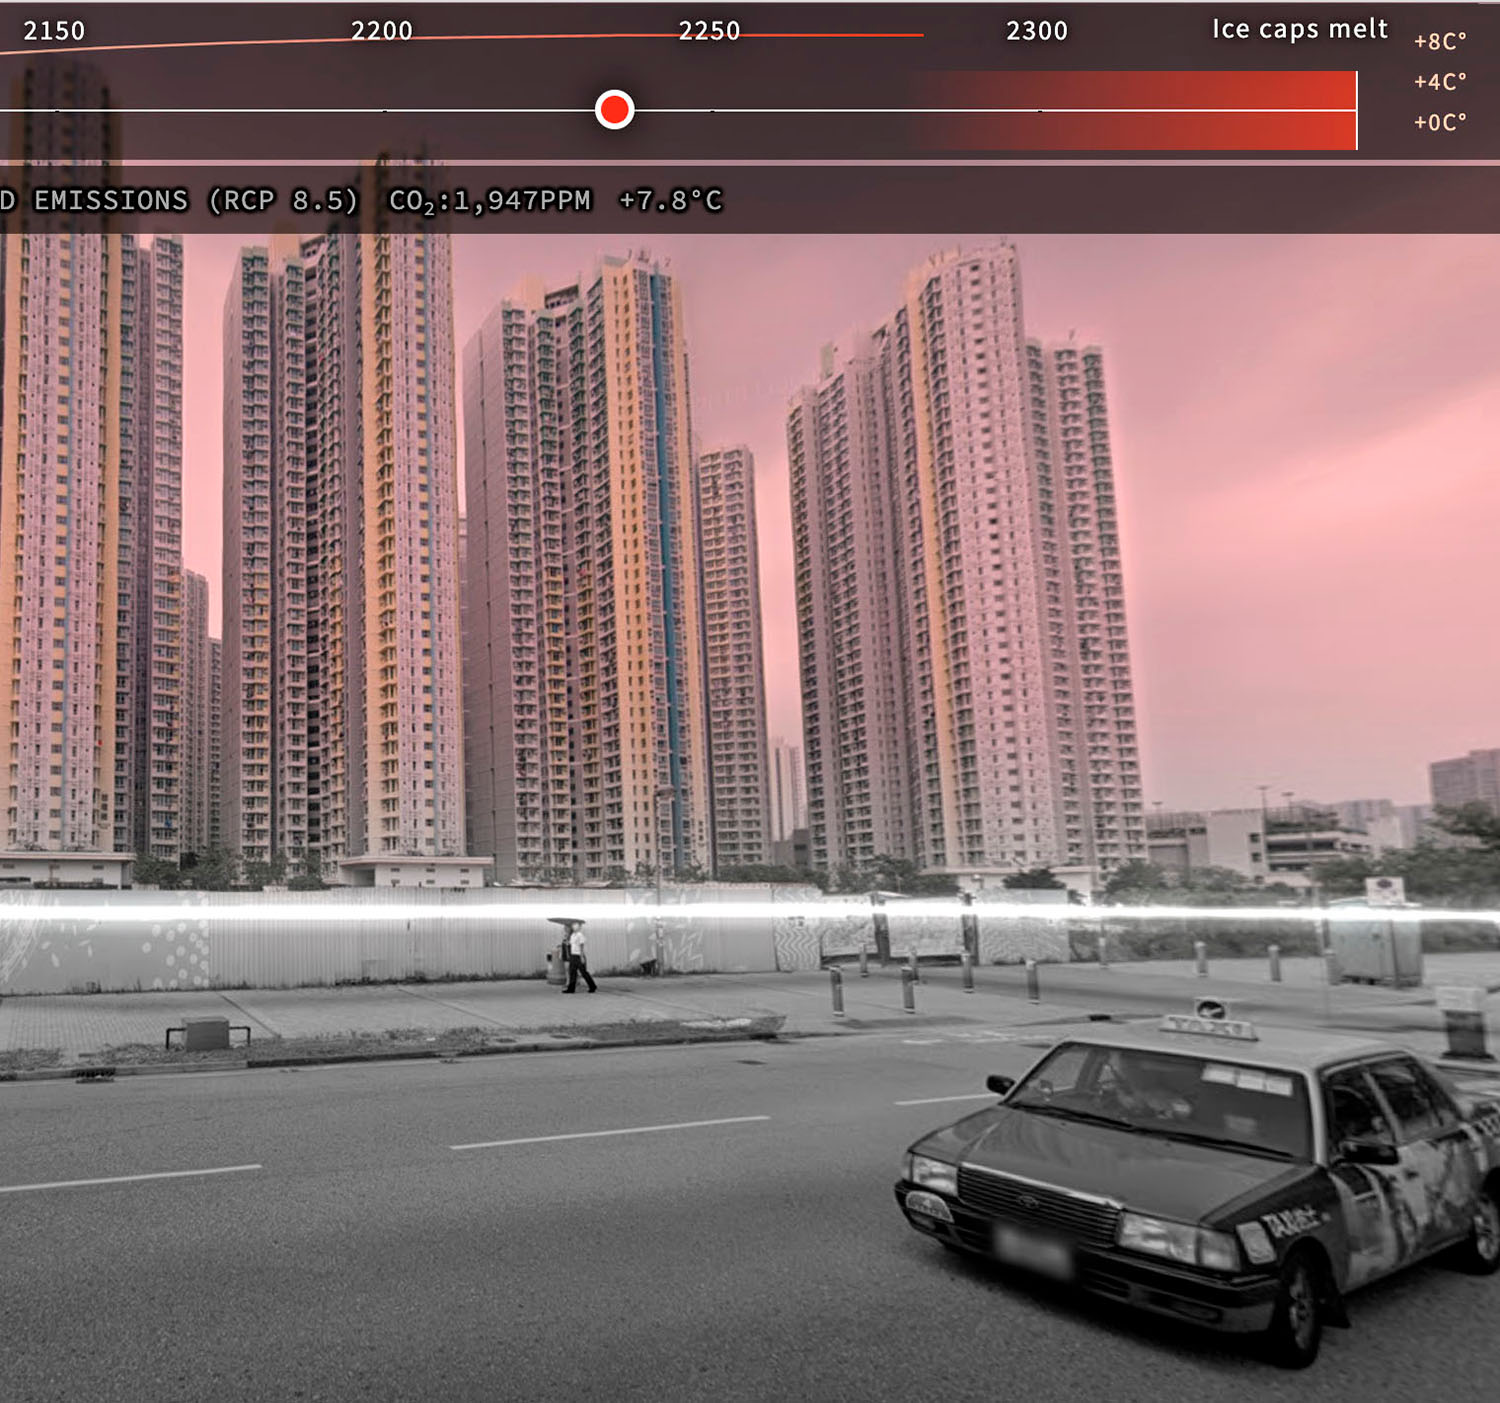 Detail of interactive visualization, showing street view of Hong Kong highrise apartments with superimposed light line indicating sea level.